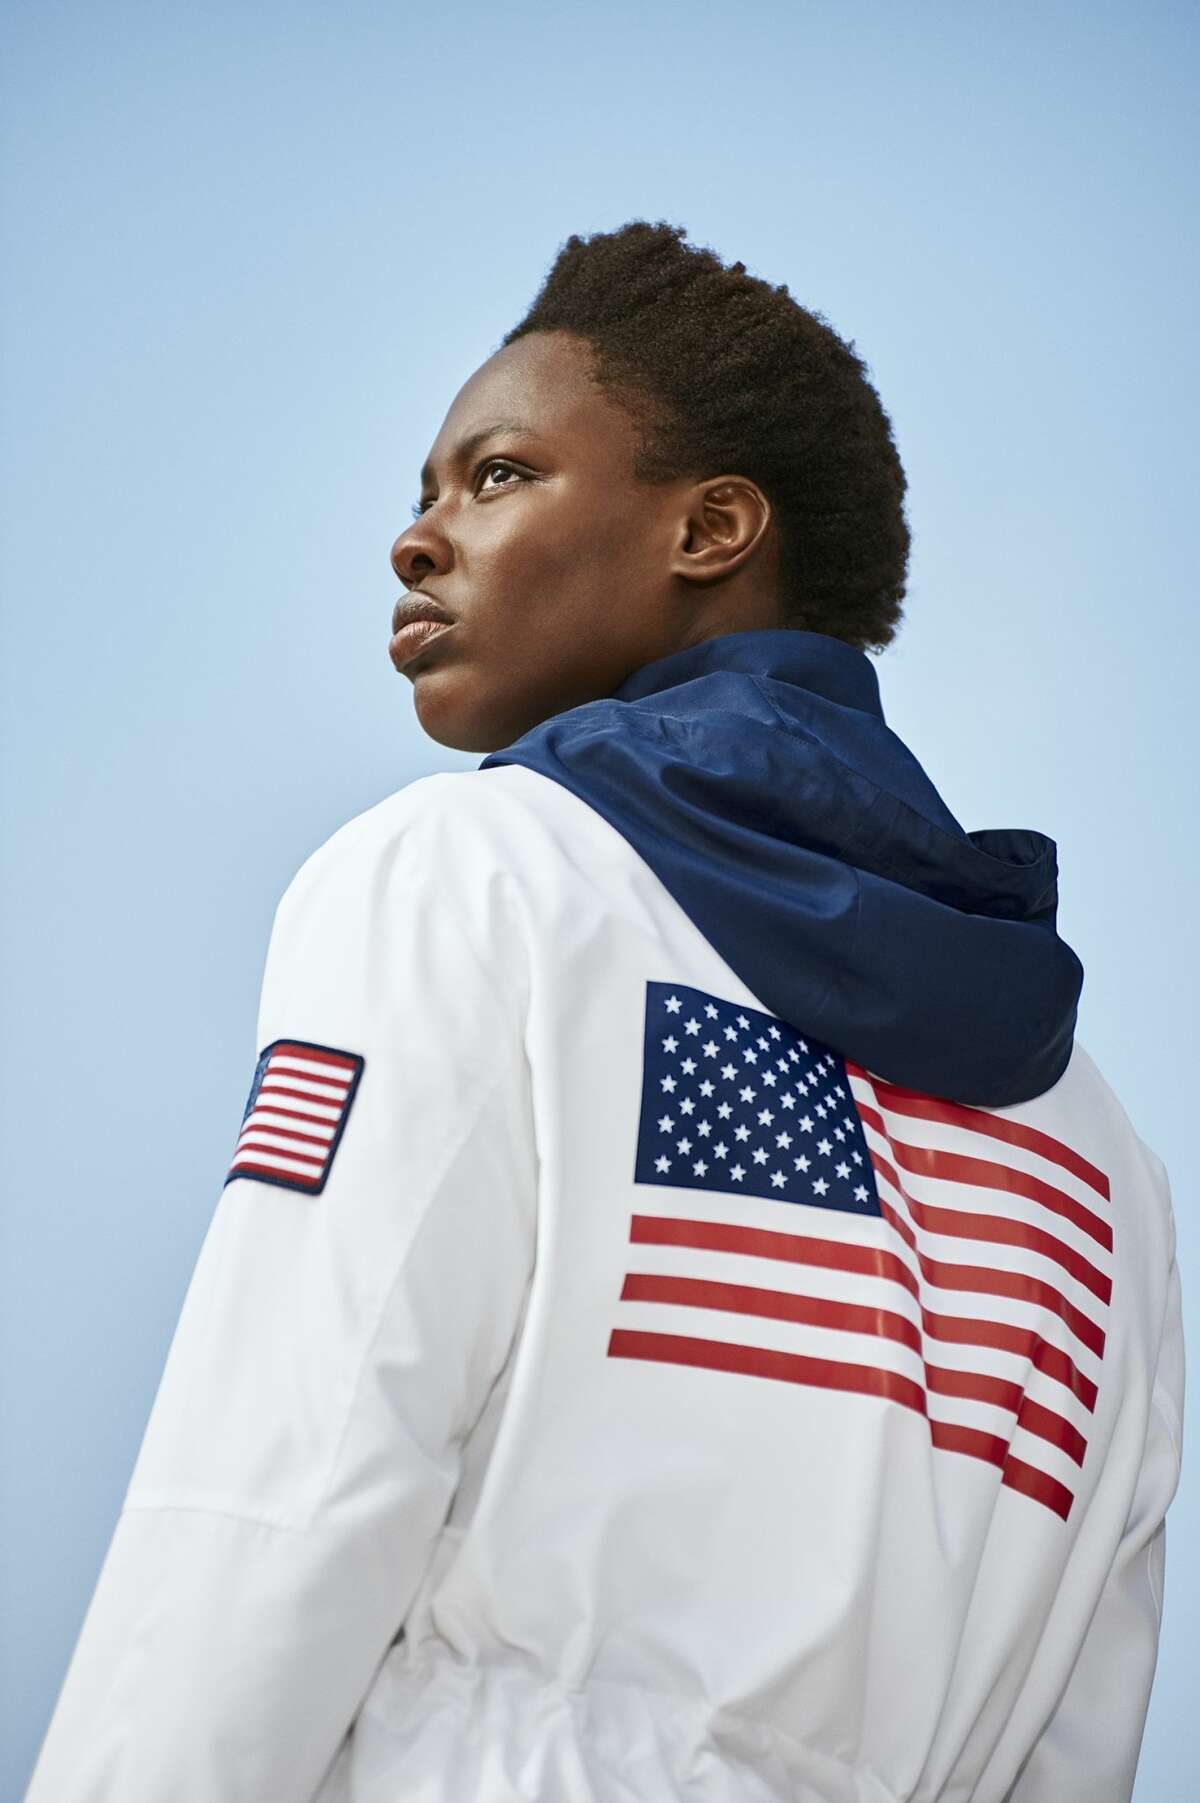 Polo Ralph Lauren is the official outfitter for Team USA at the 2021 Olympic Games in Tokyo. Lauren lives just across the Connecticut state line in Bedford, NY.